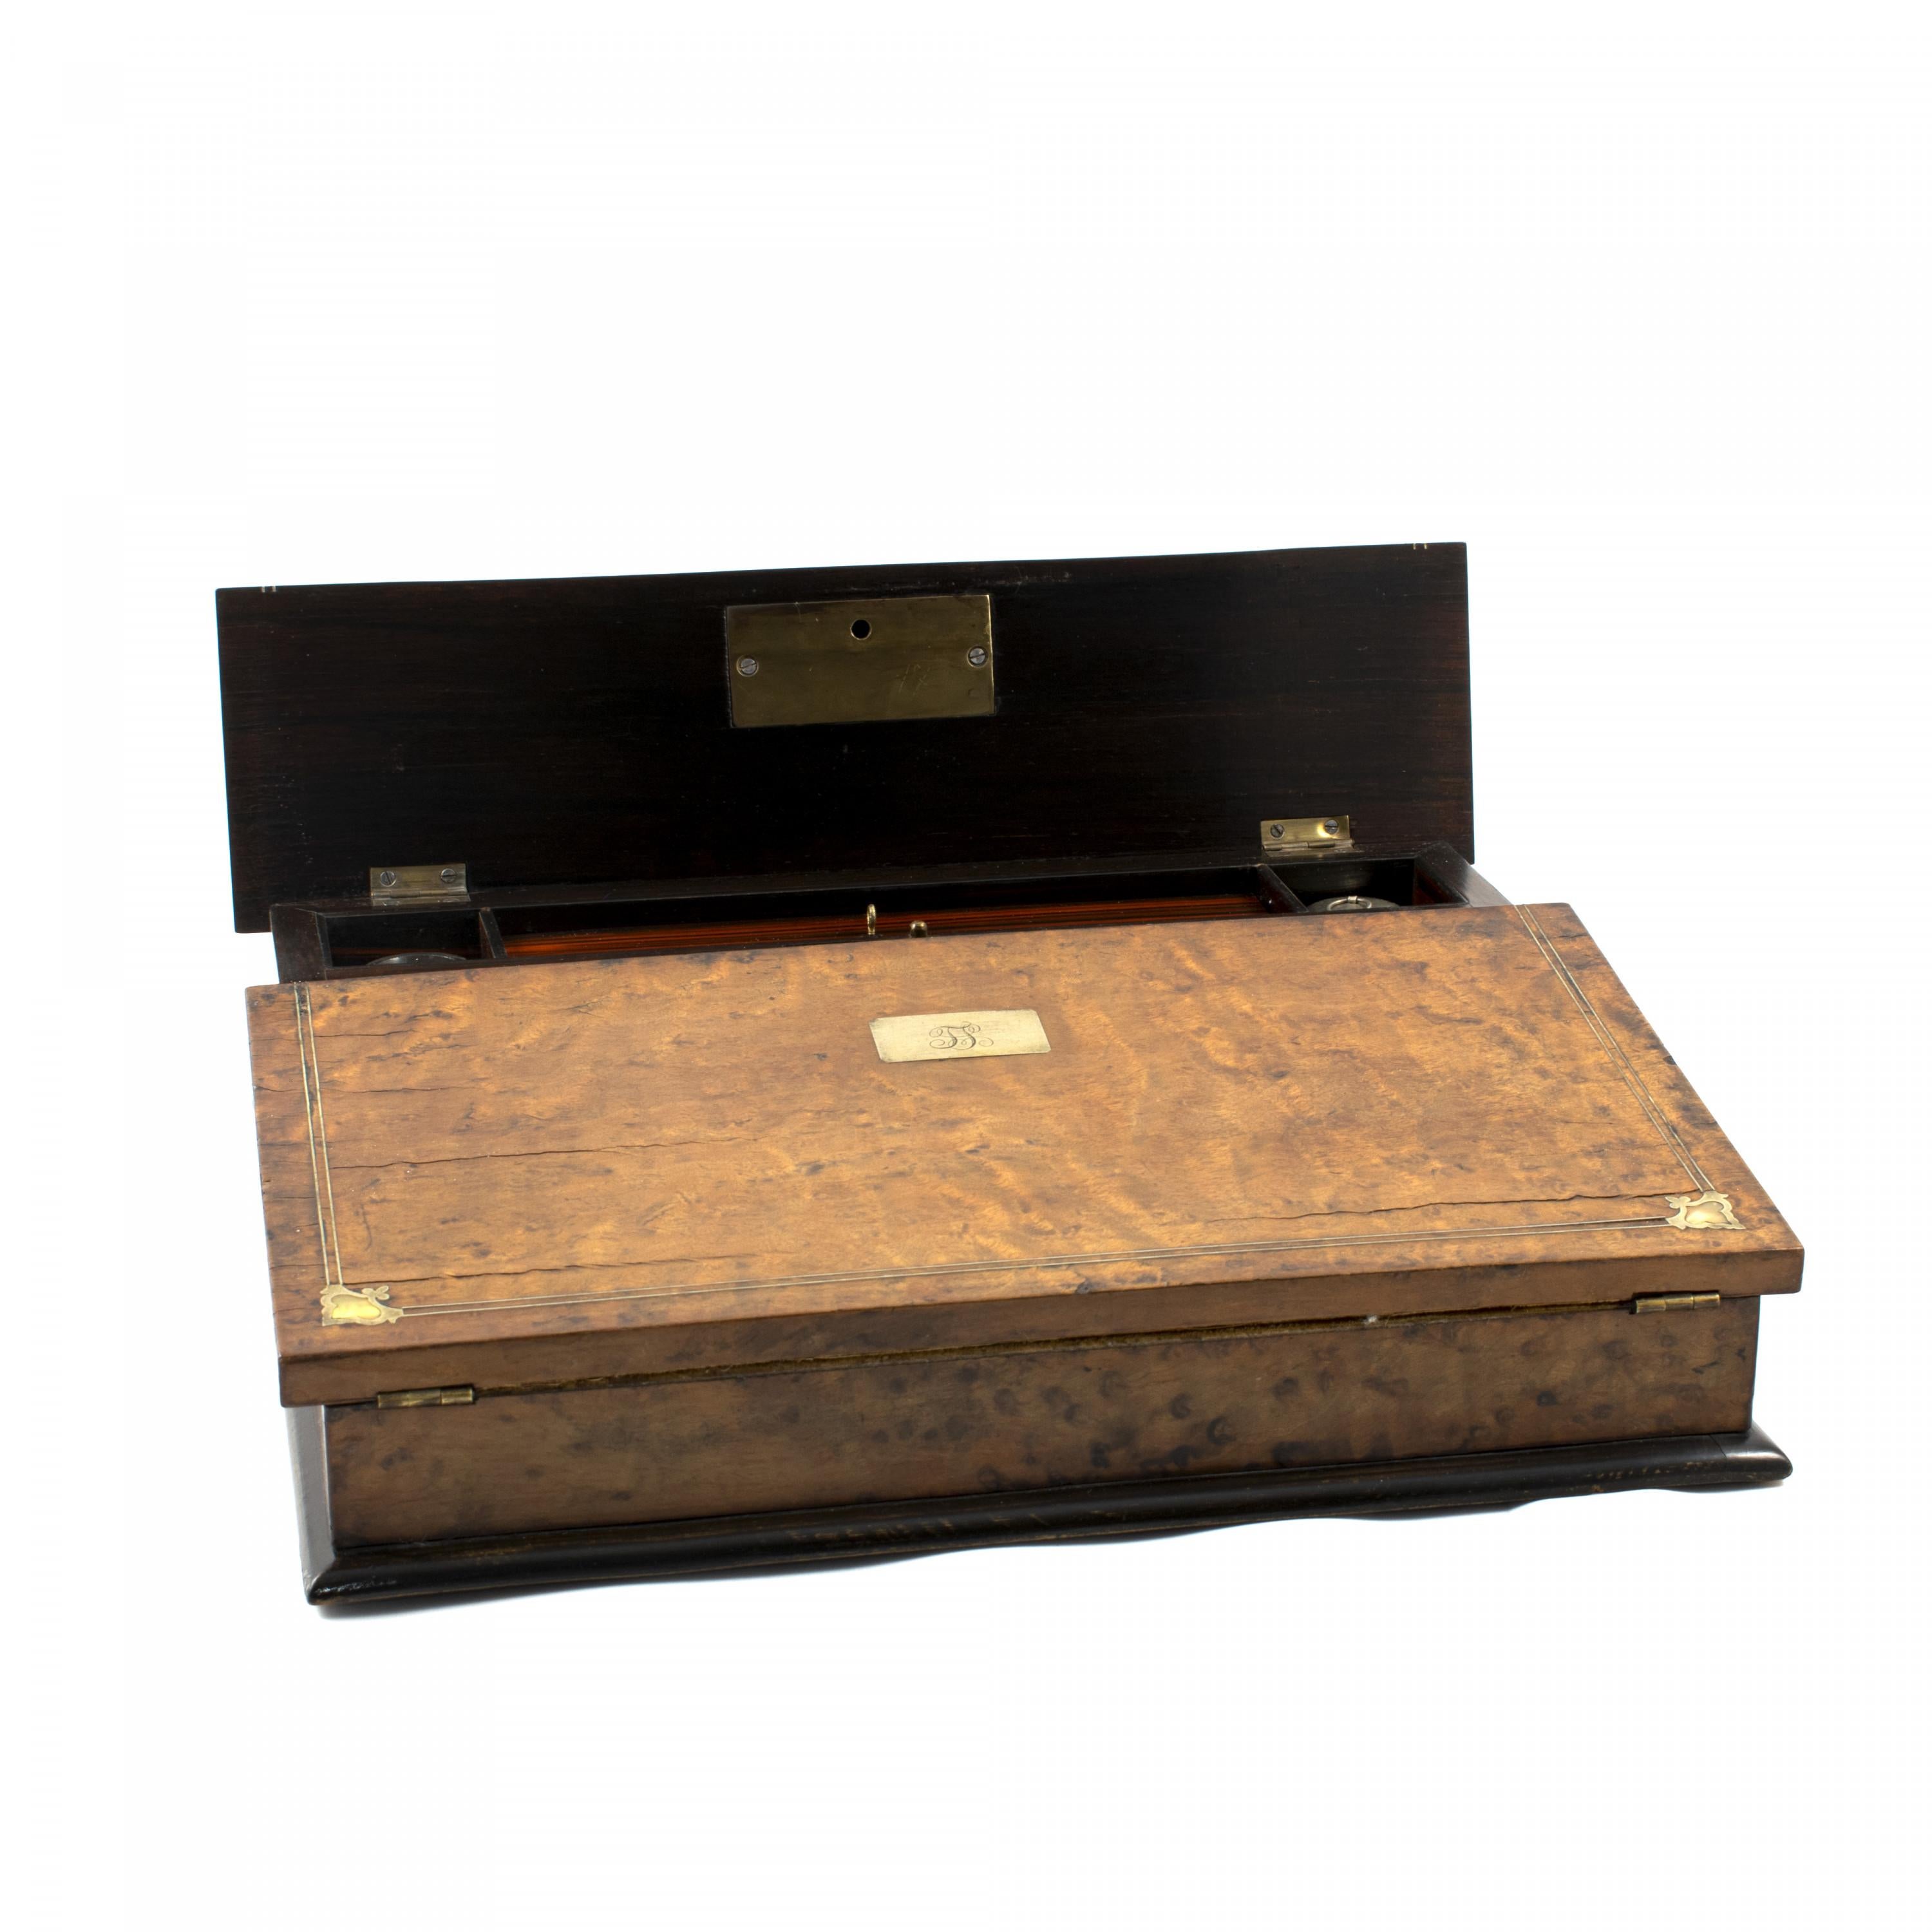 English writing slope in bird's-eye maple.
The box can be opened to create a sloping desk pad covered with (original) fabric.
Inside a fitted interior of compartments for storing ink wells, pens, papers or similar.
Outer main area with mother of